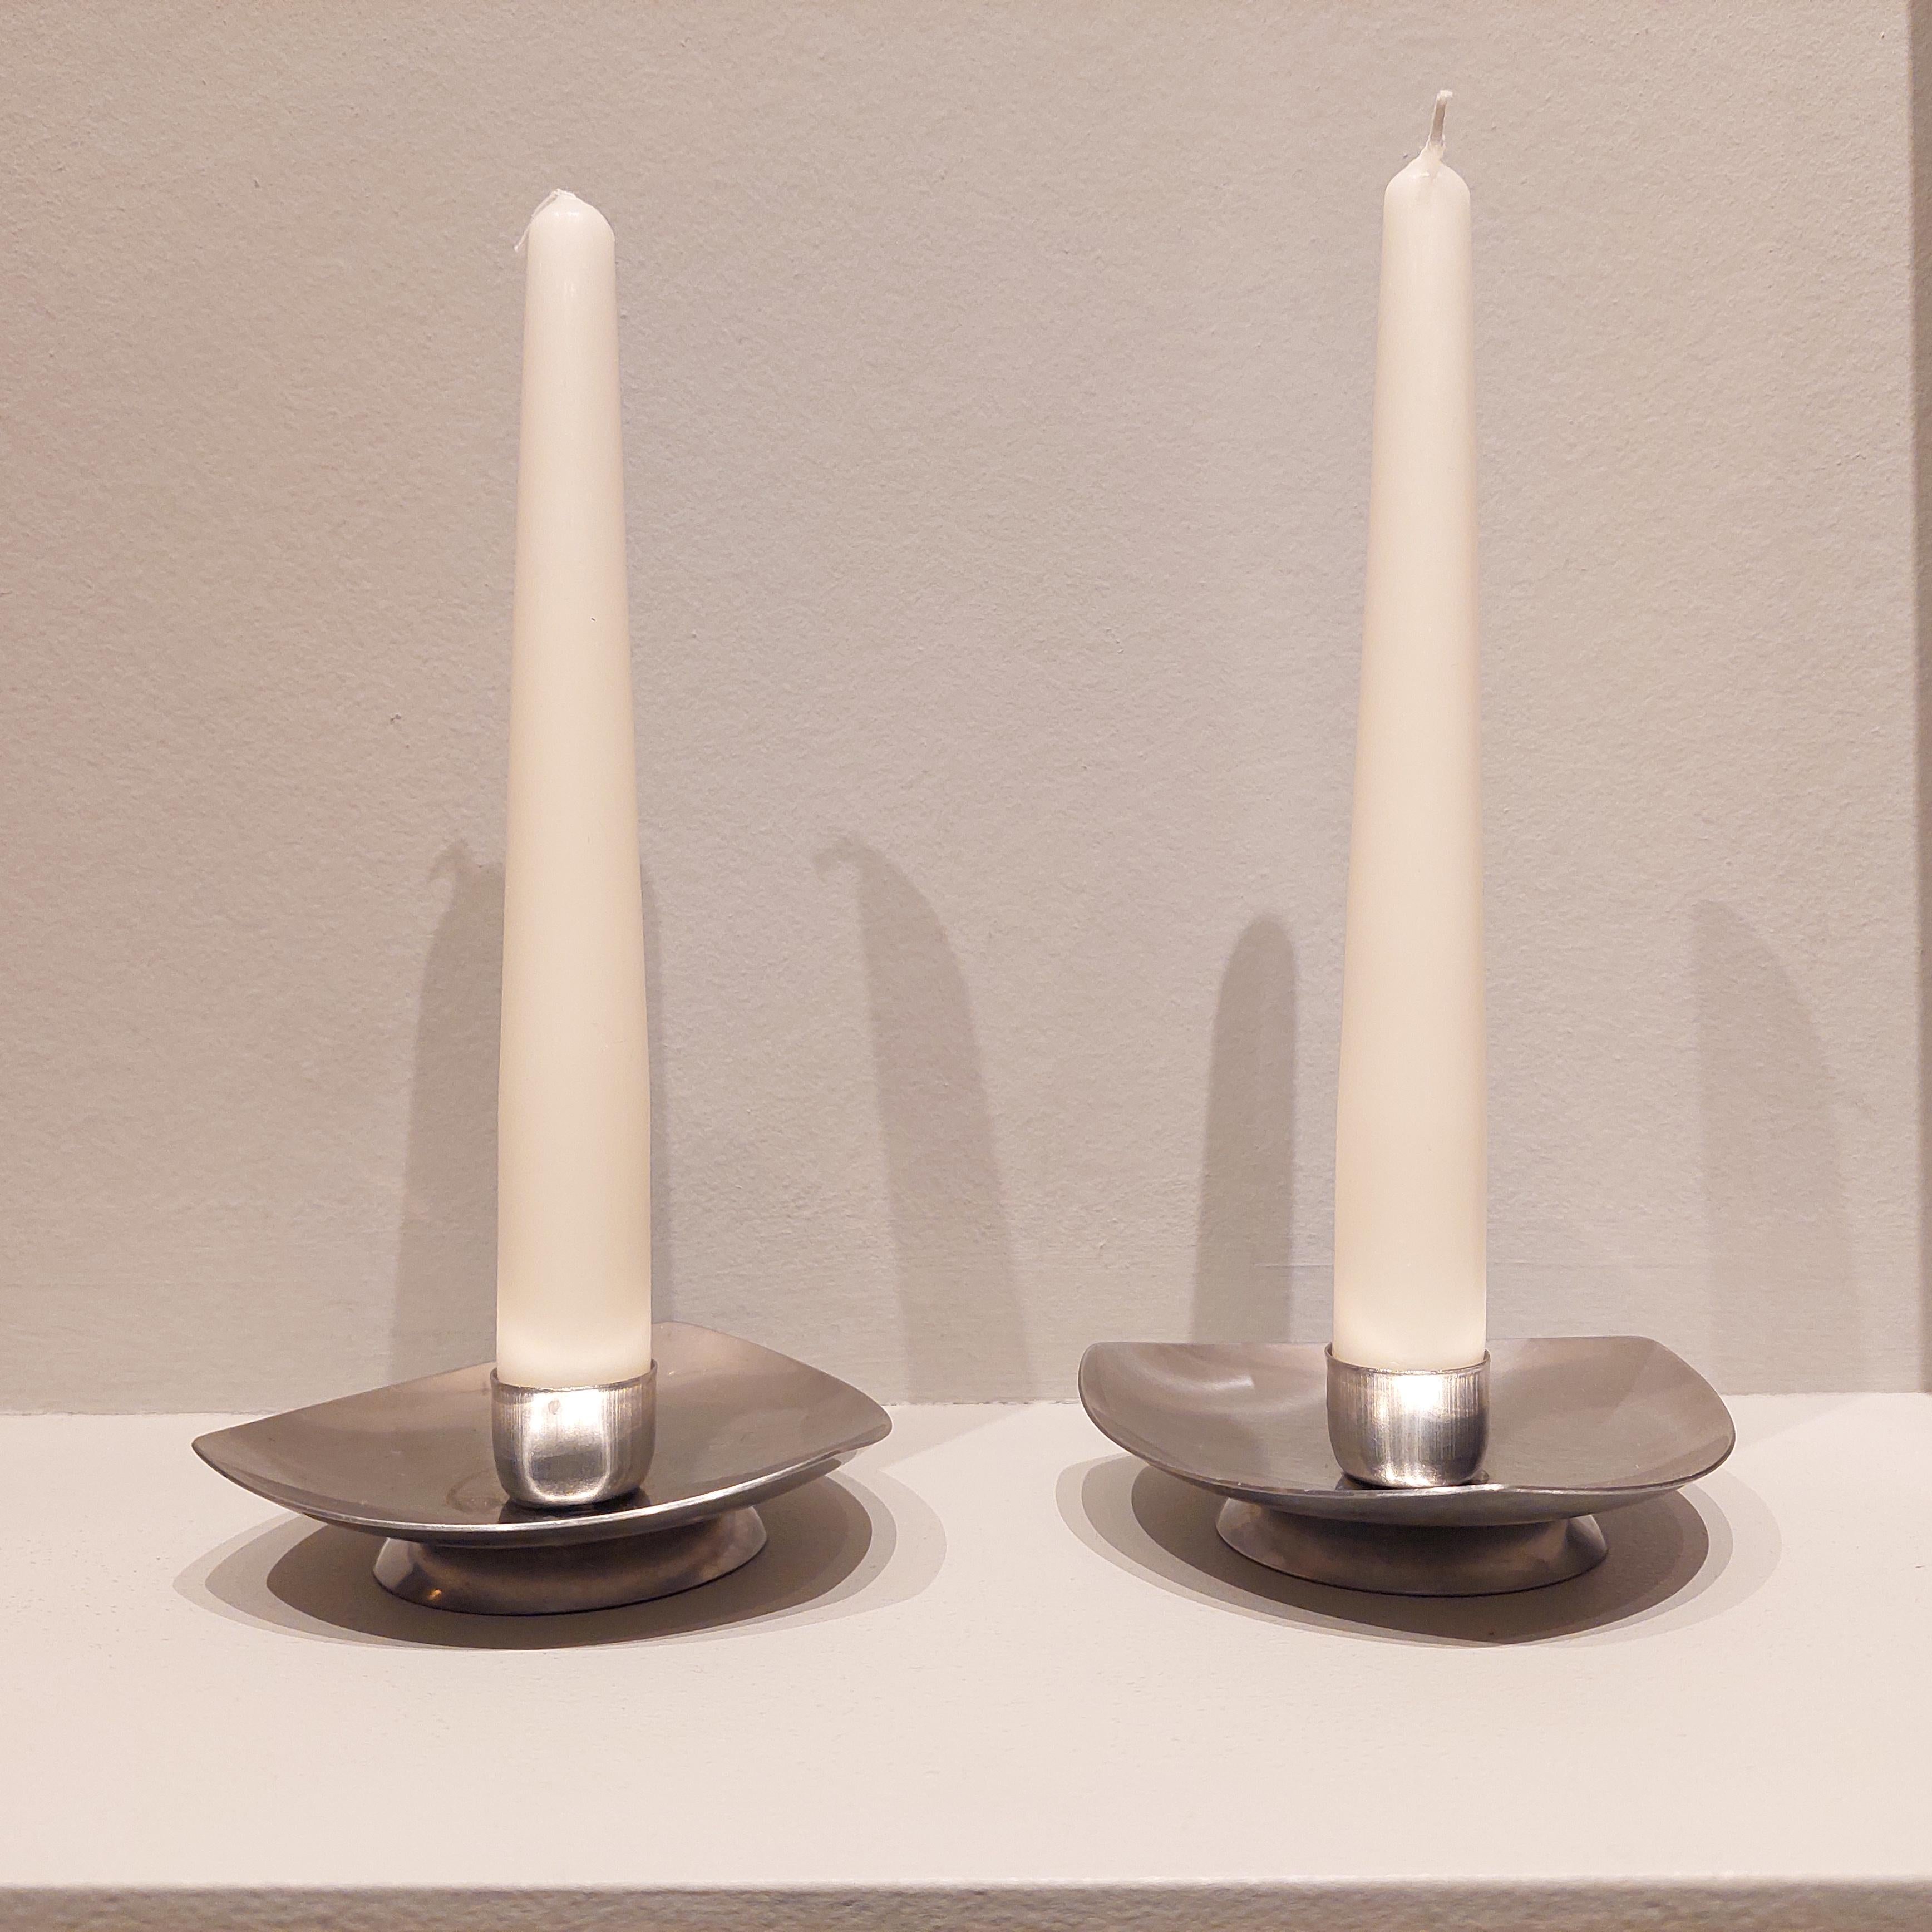 This is a set of 2  stainless steel candle holders from Denmark.
Triangular shaped candle holders.
Concave abstract rounded triangles, made off stainless steel with gorgeous silver color.
They stack nicely together if you like that that look. (see